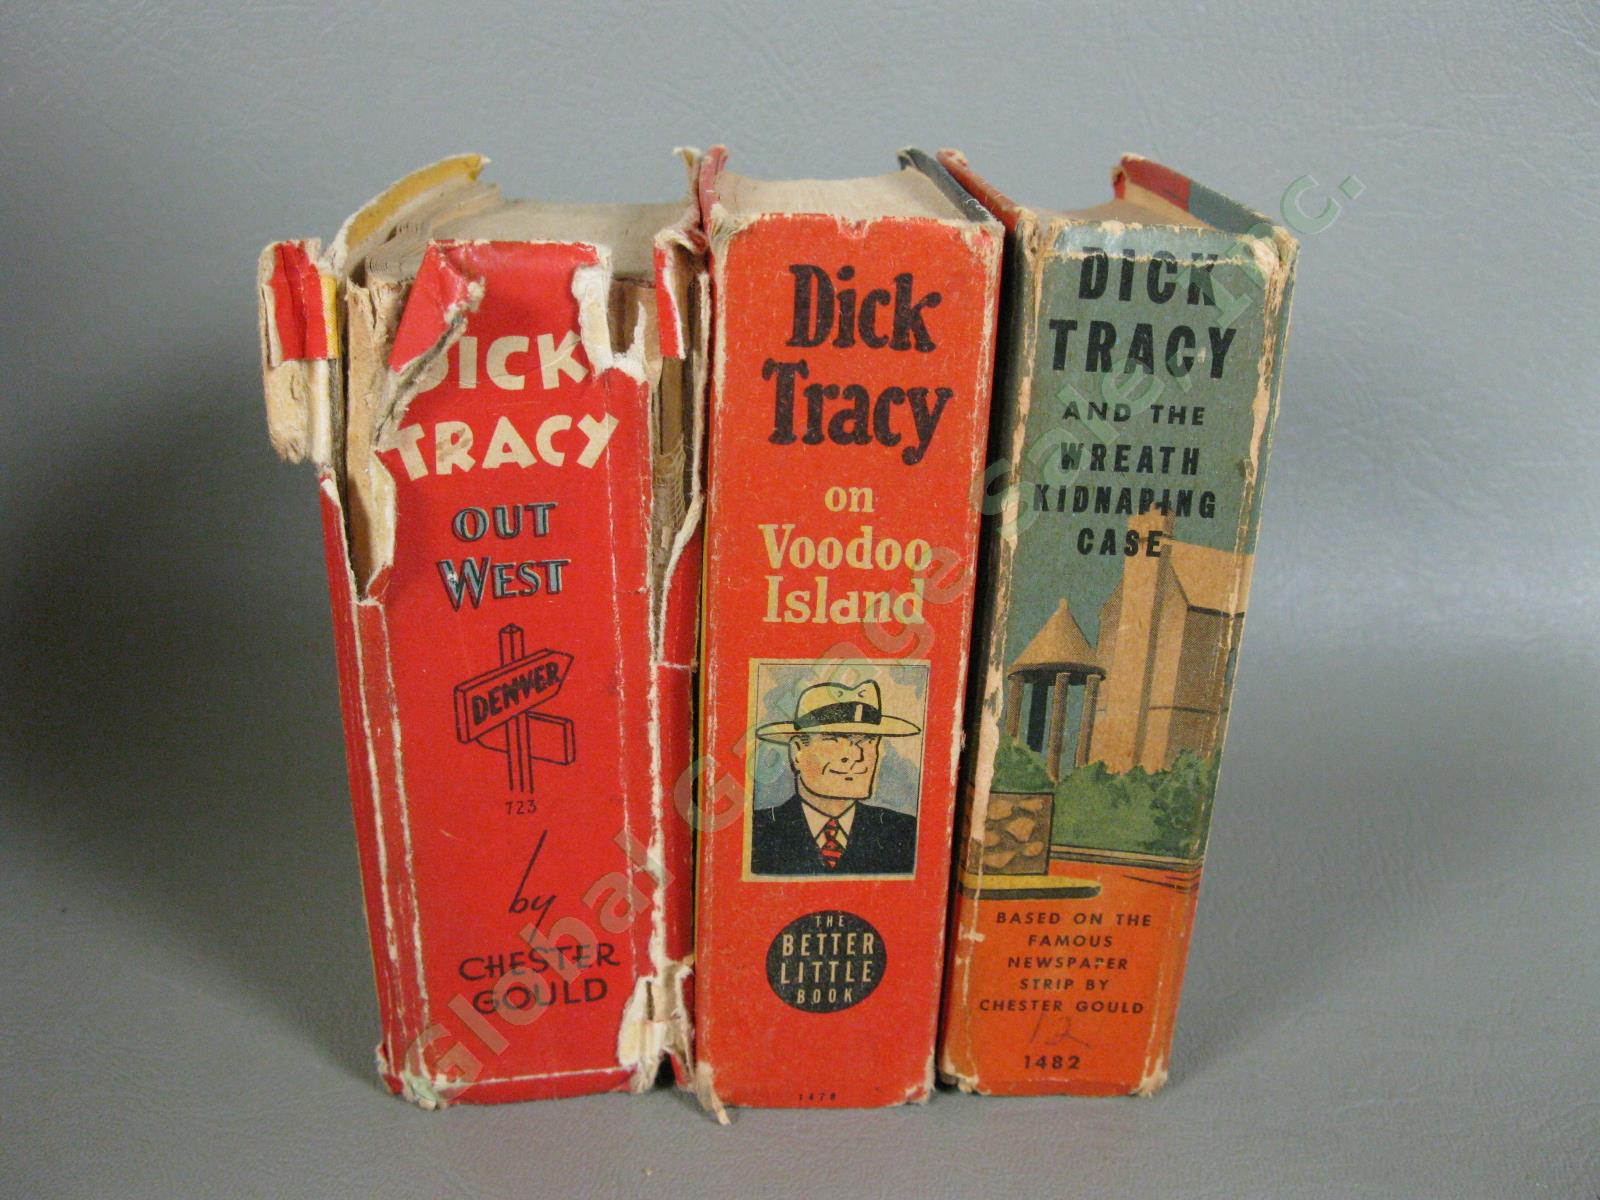 Vtg 14 Dick Tracy Big/Better Little Books Lot Penfield Mystery Voodoo Island +NR 21